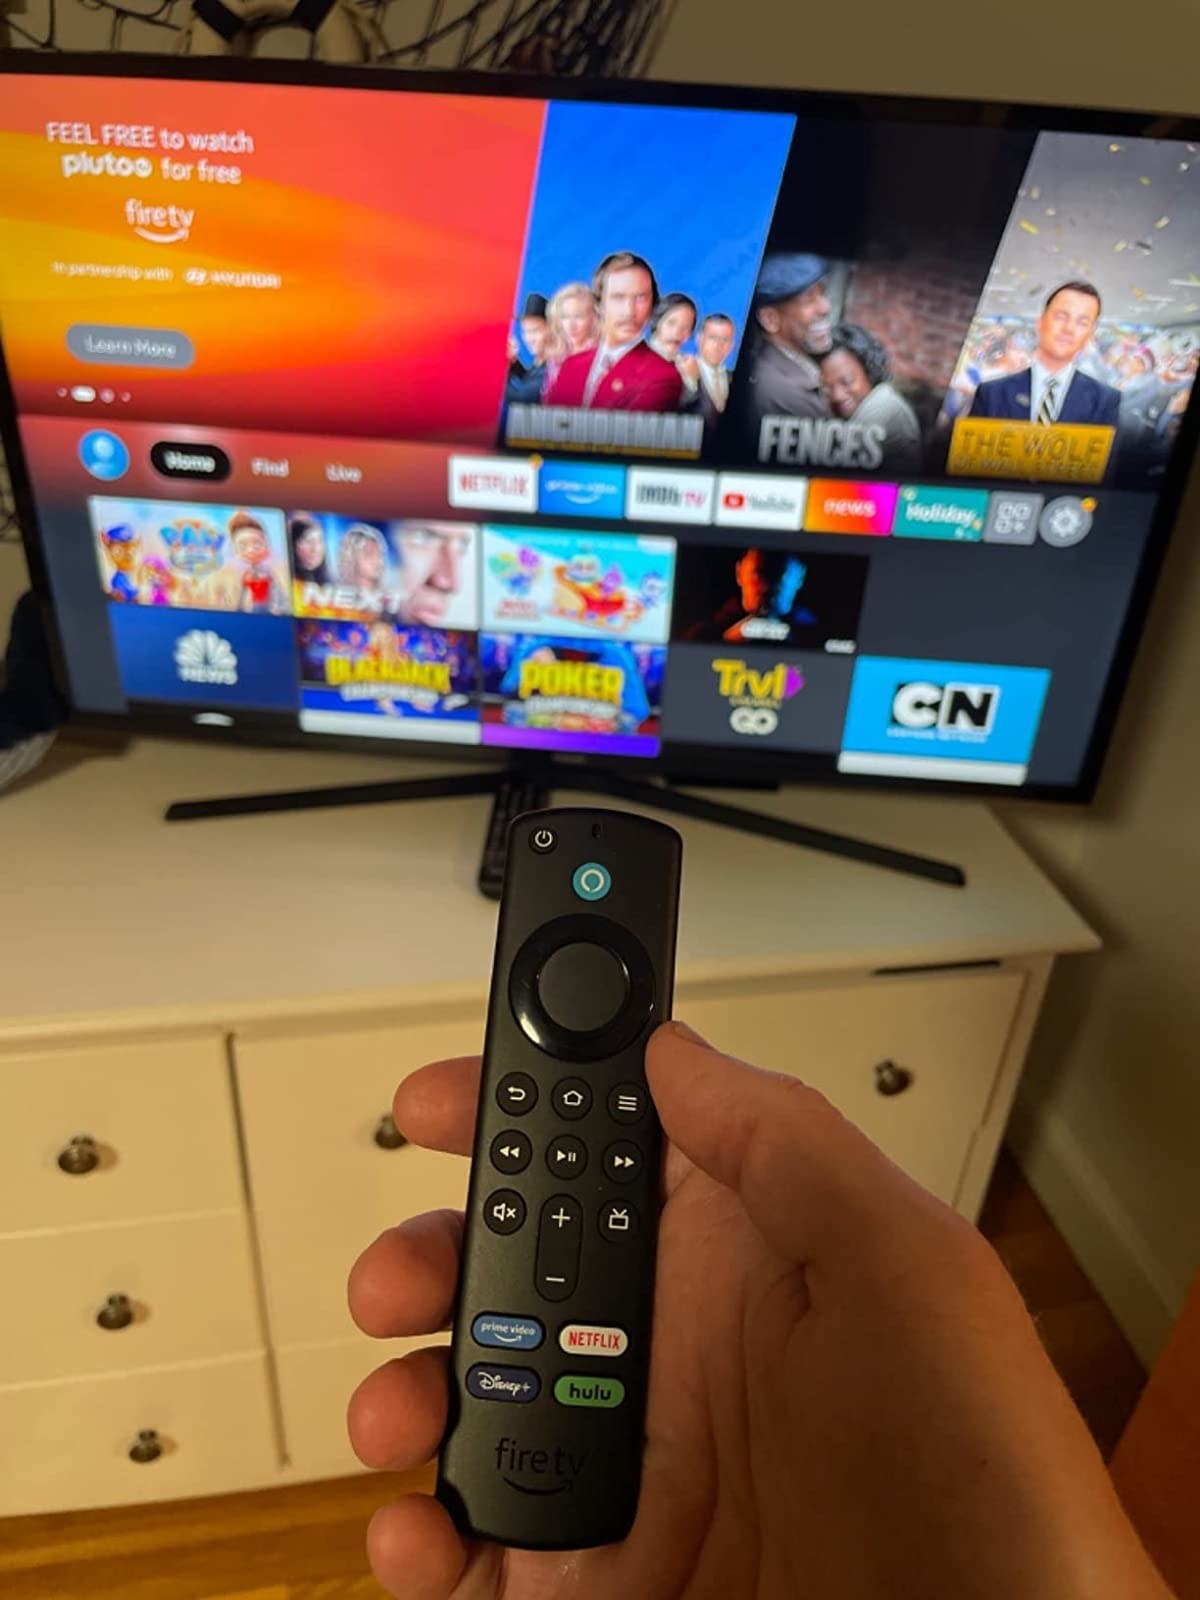 a reviewer holding the remote and pointing to the TV